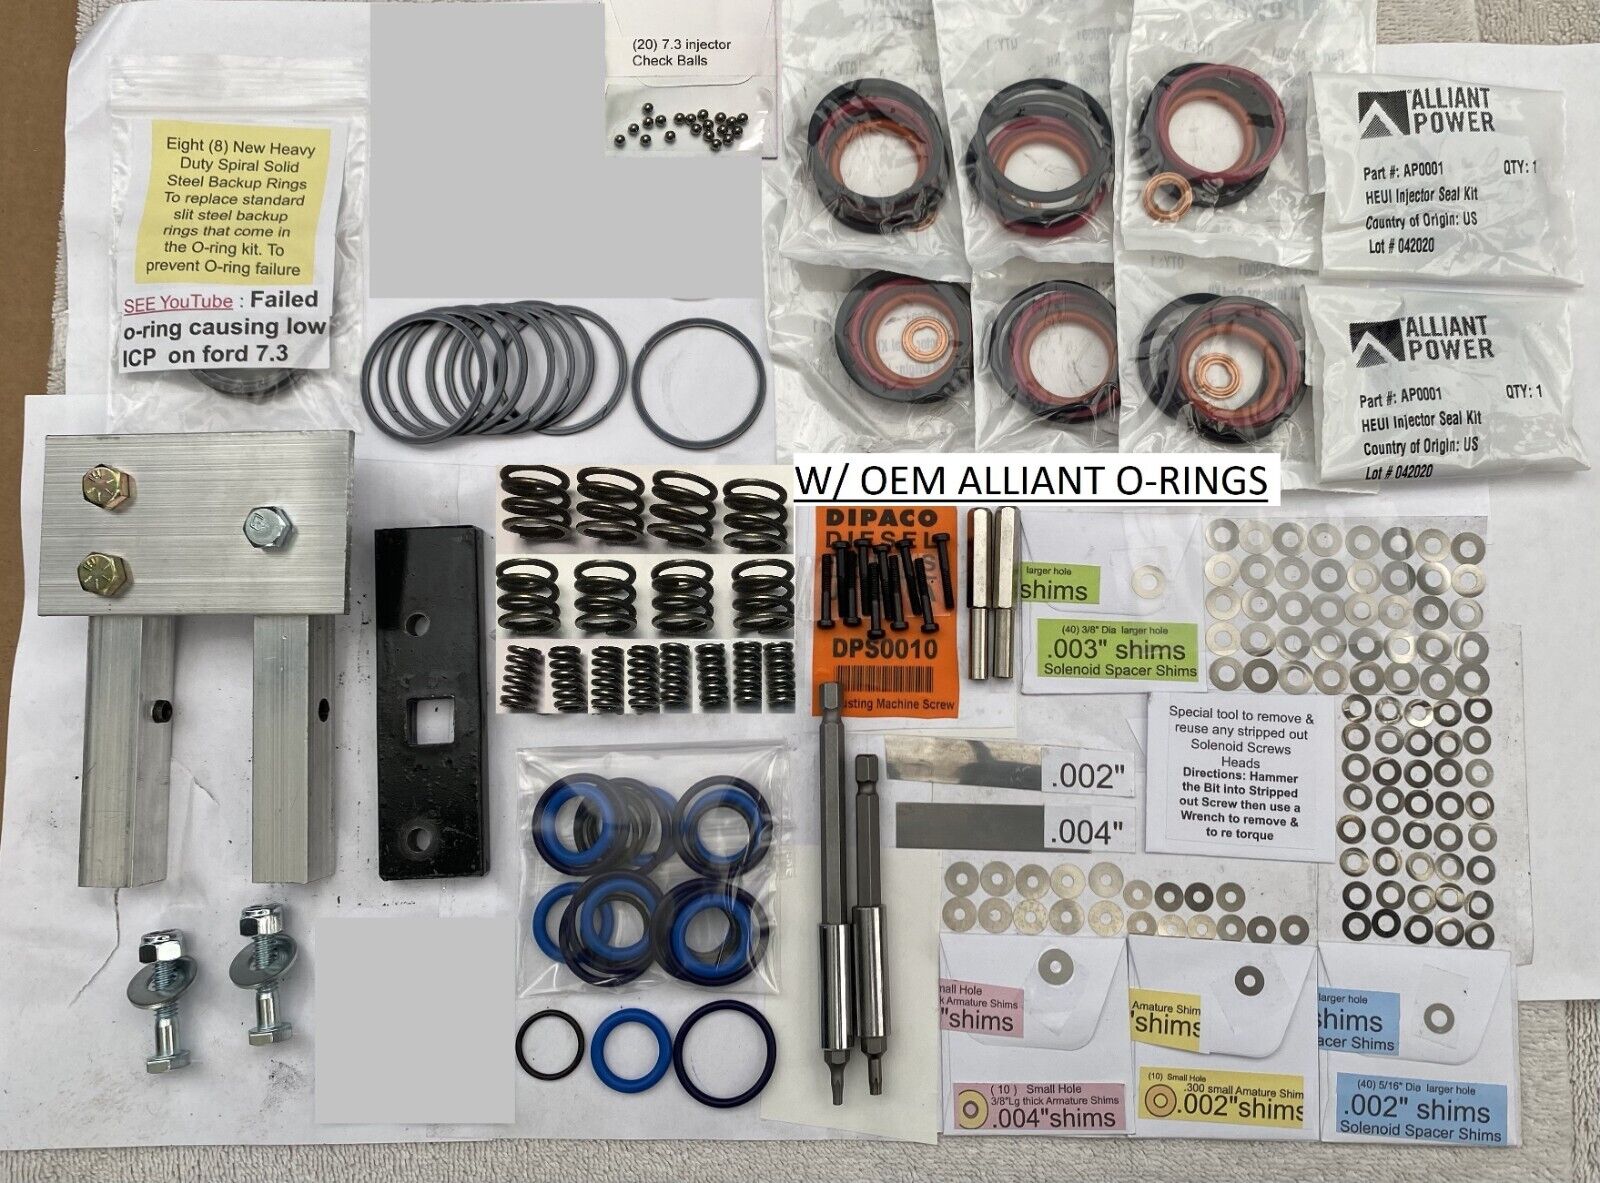 7.3L P.S. injector deluxe rebuild KIT w/ clamp, tools, springs & OEM ext seals